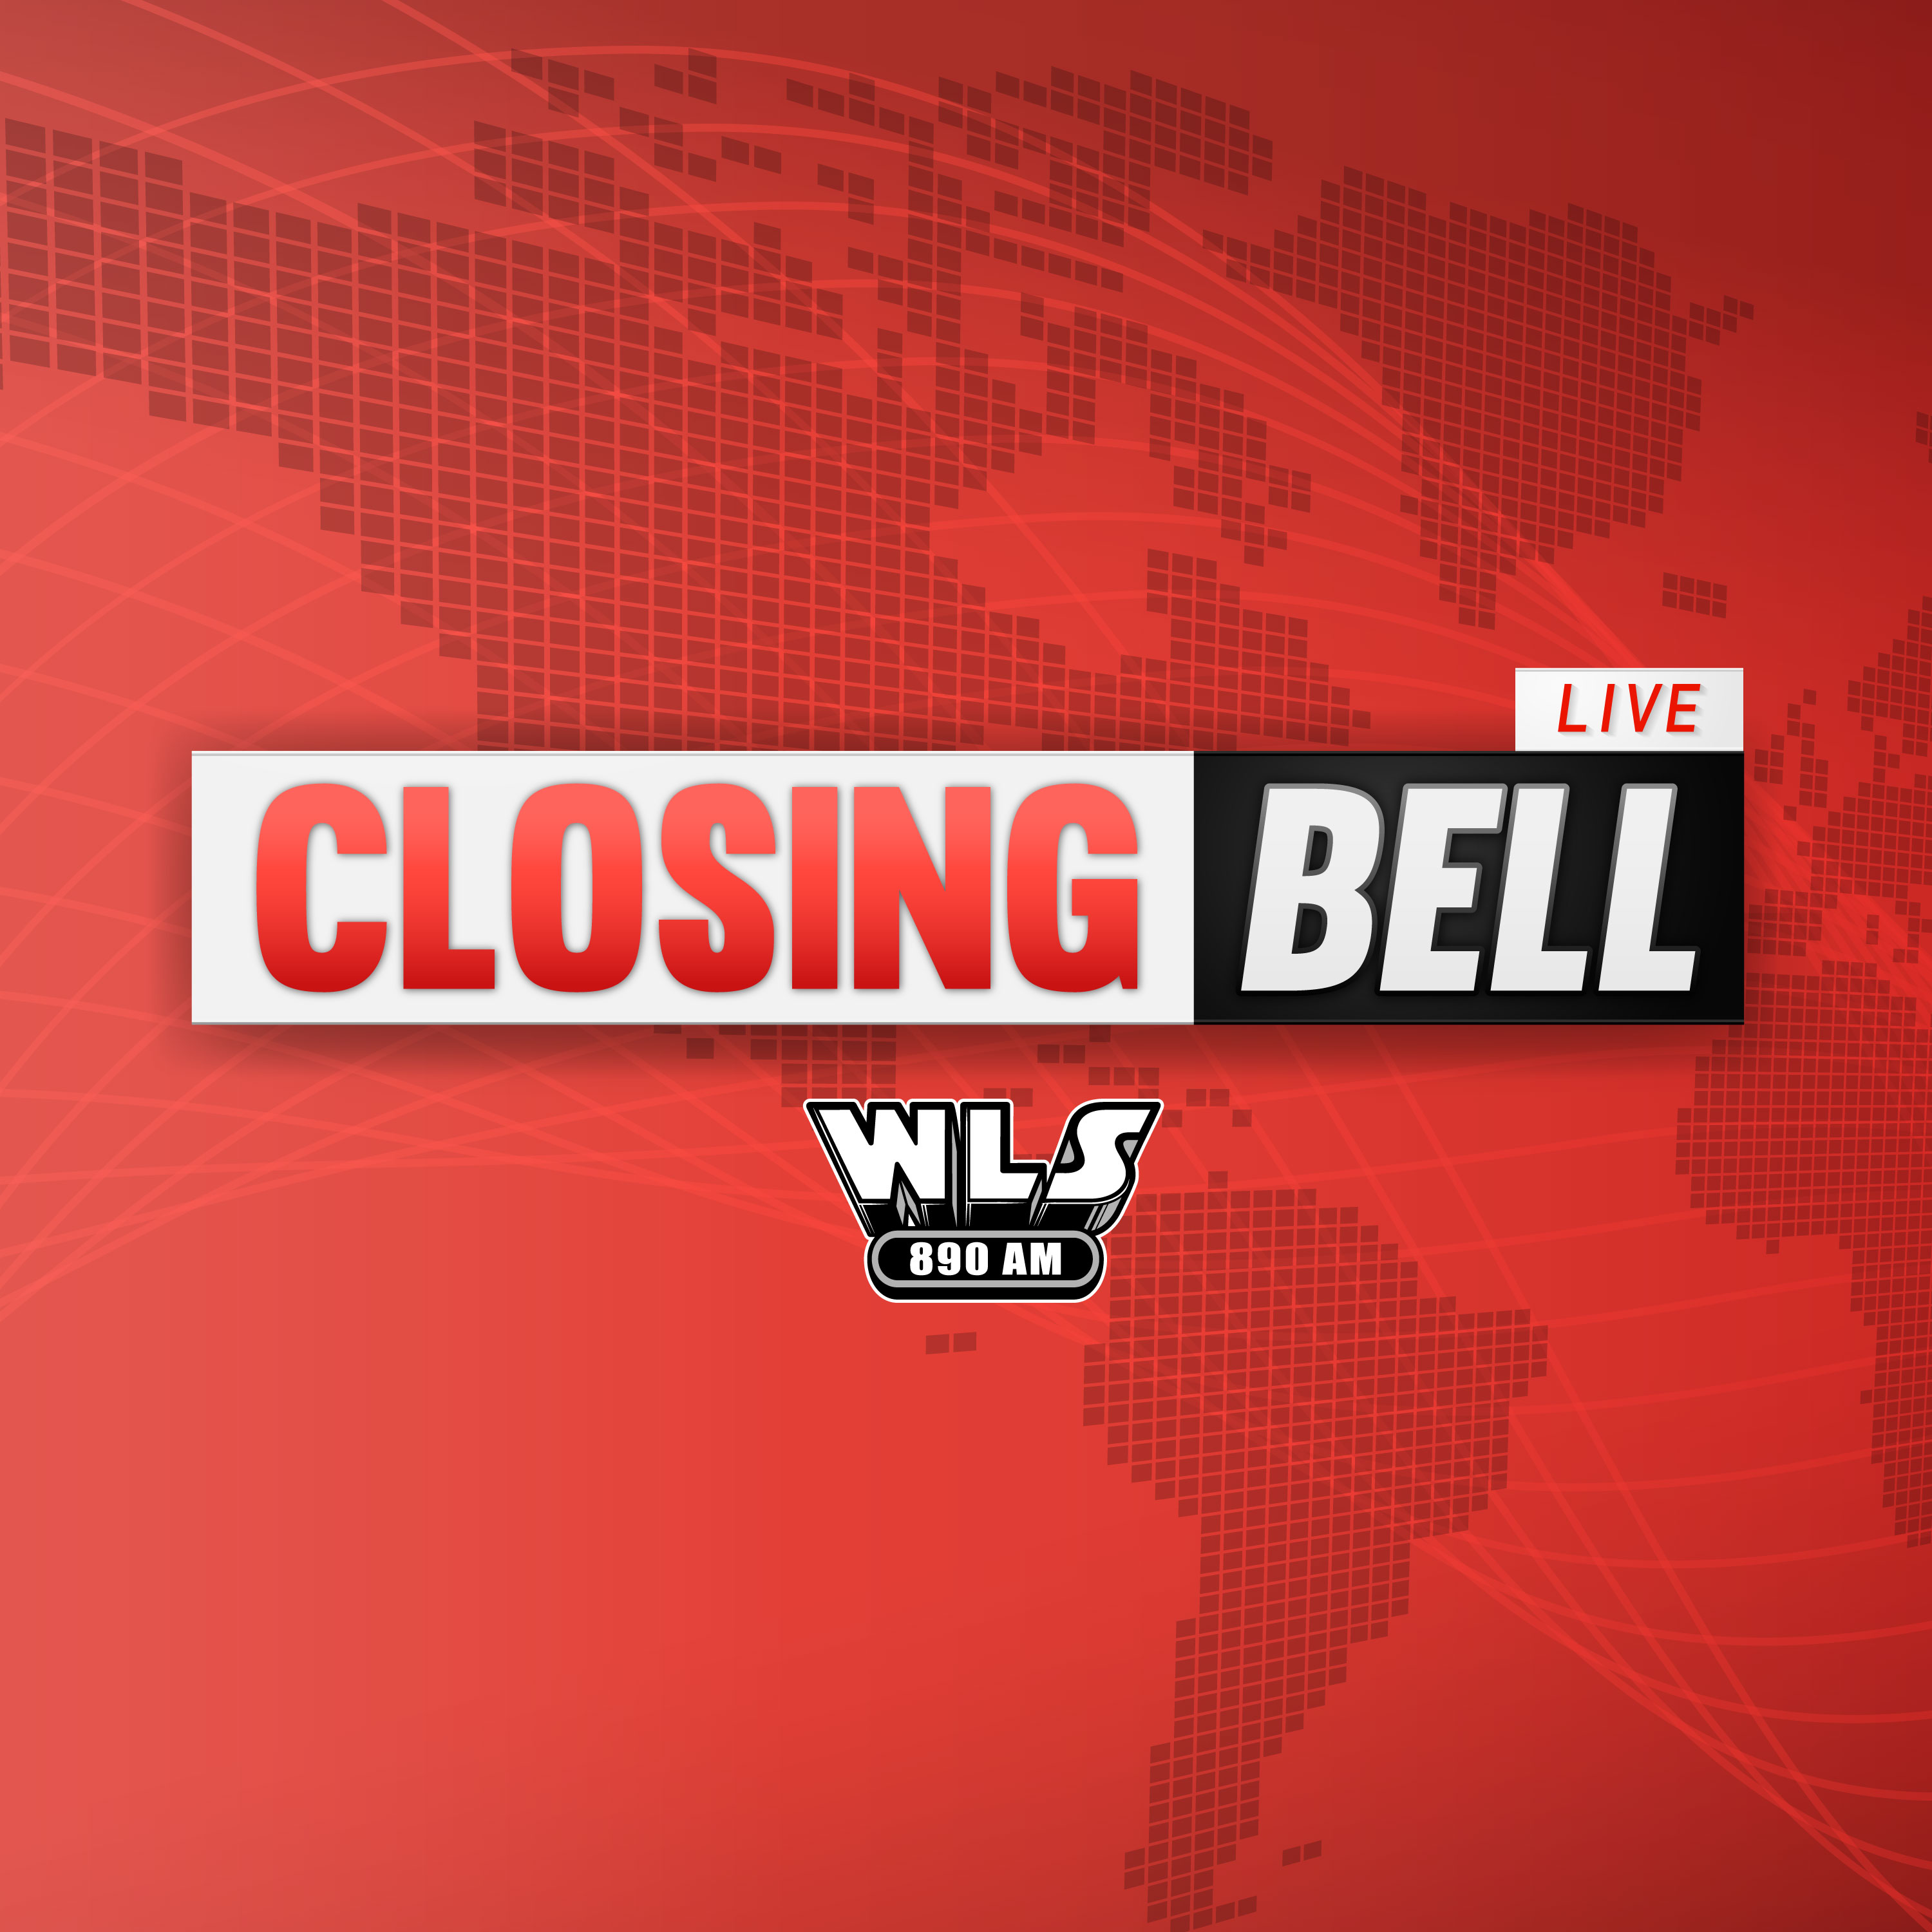 The Closing Bell (5/15) - All You Can Eat Challenges to Business & EV’s Unintended Victim